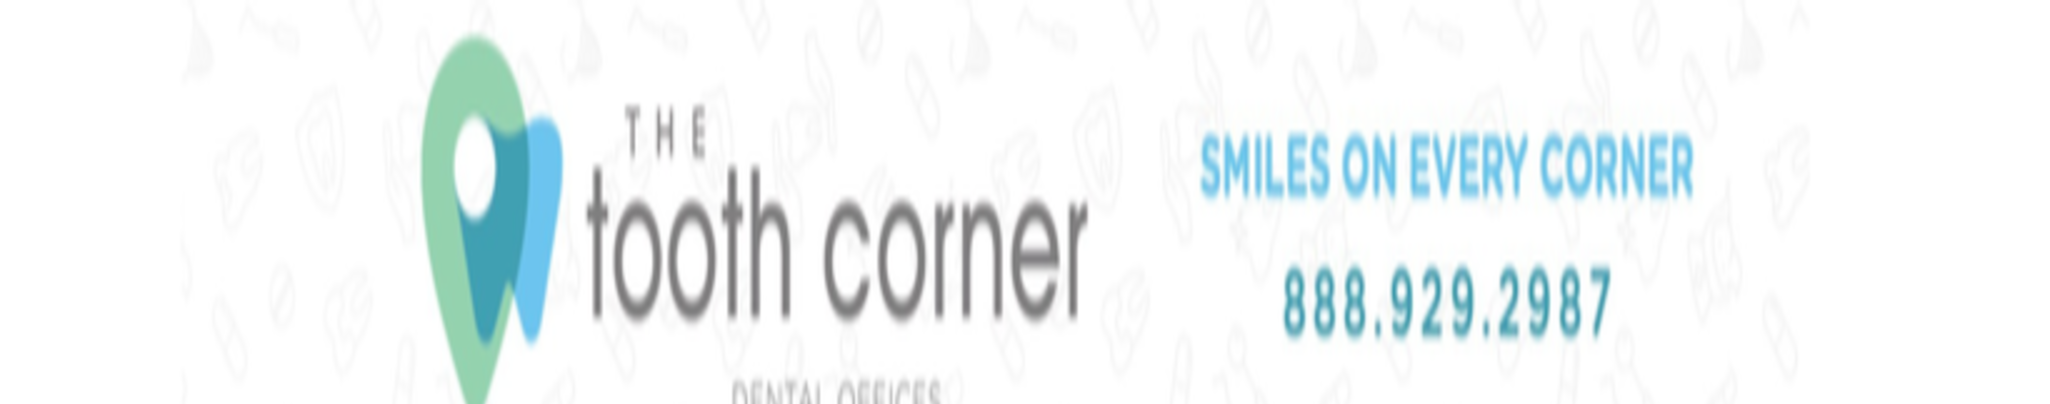 The Tooth Corner's profile banner